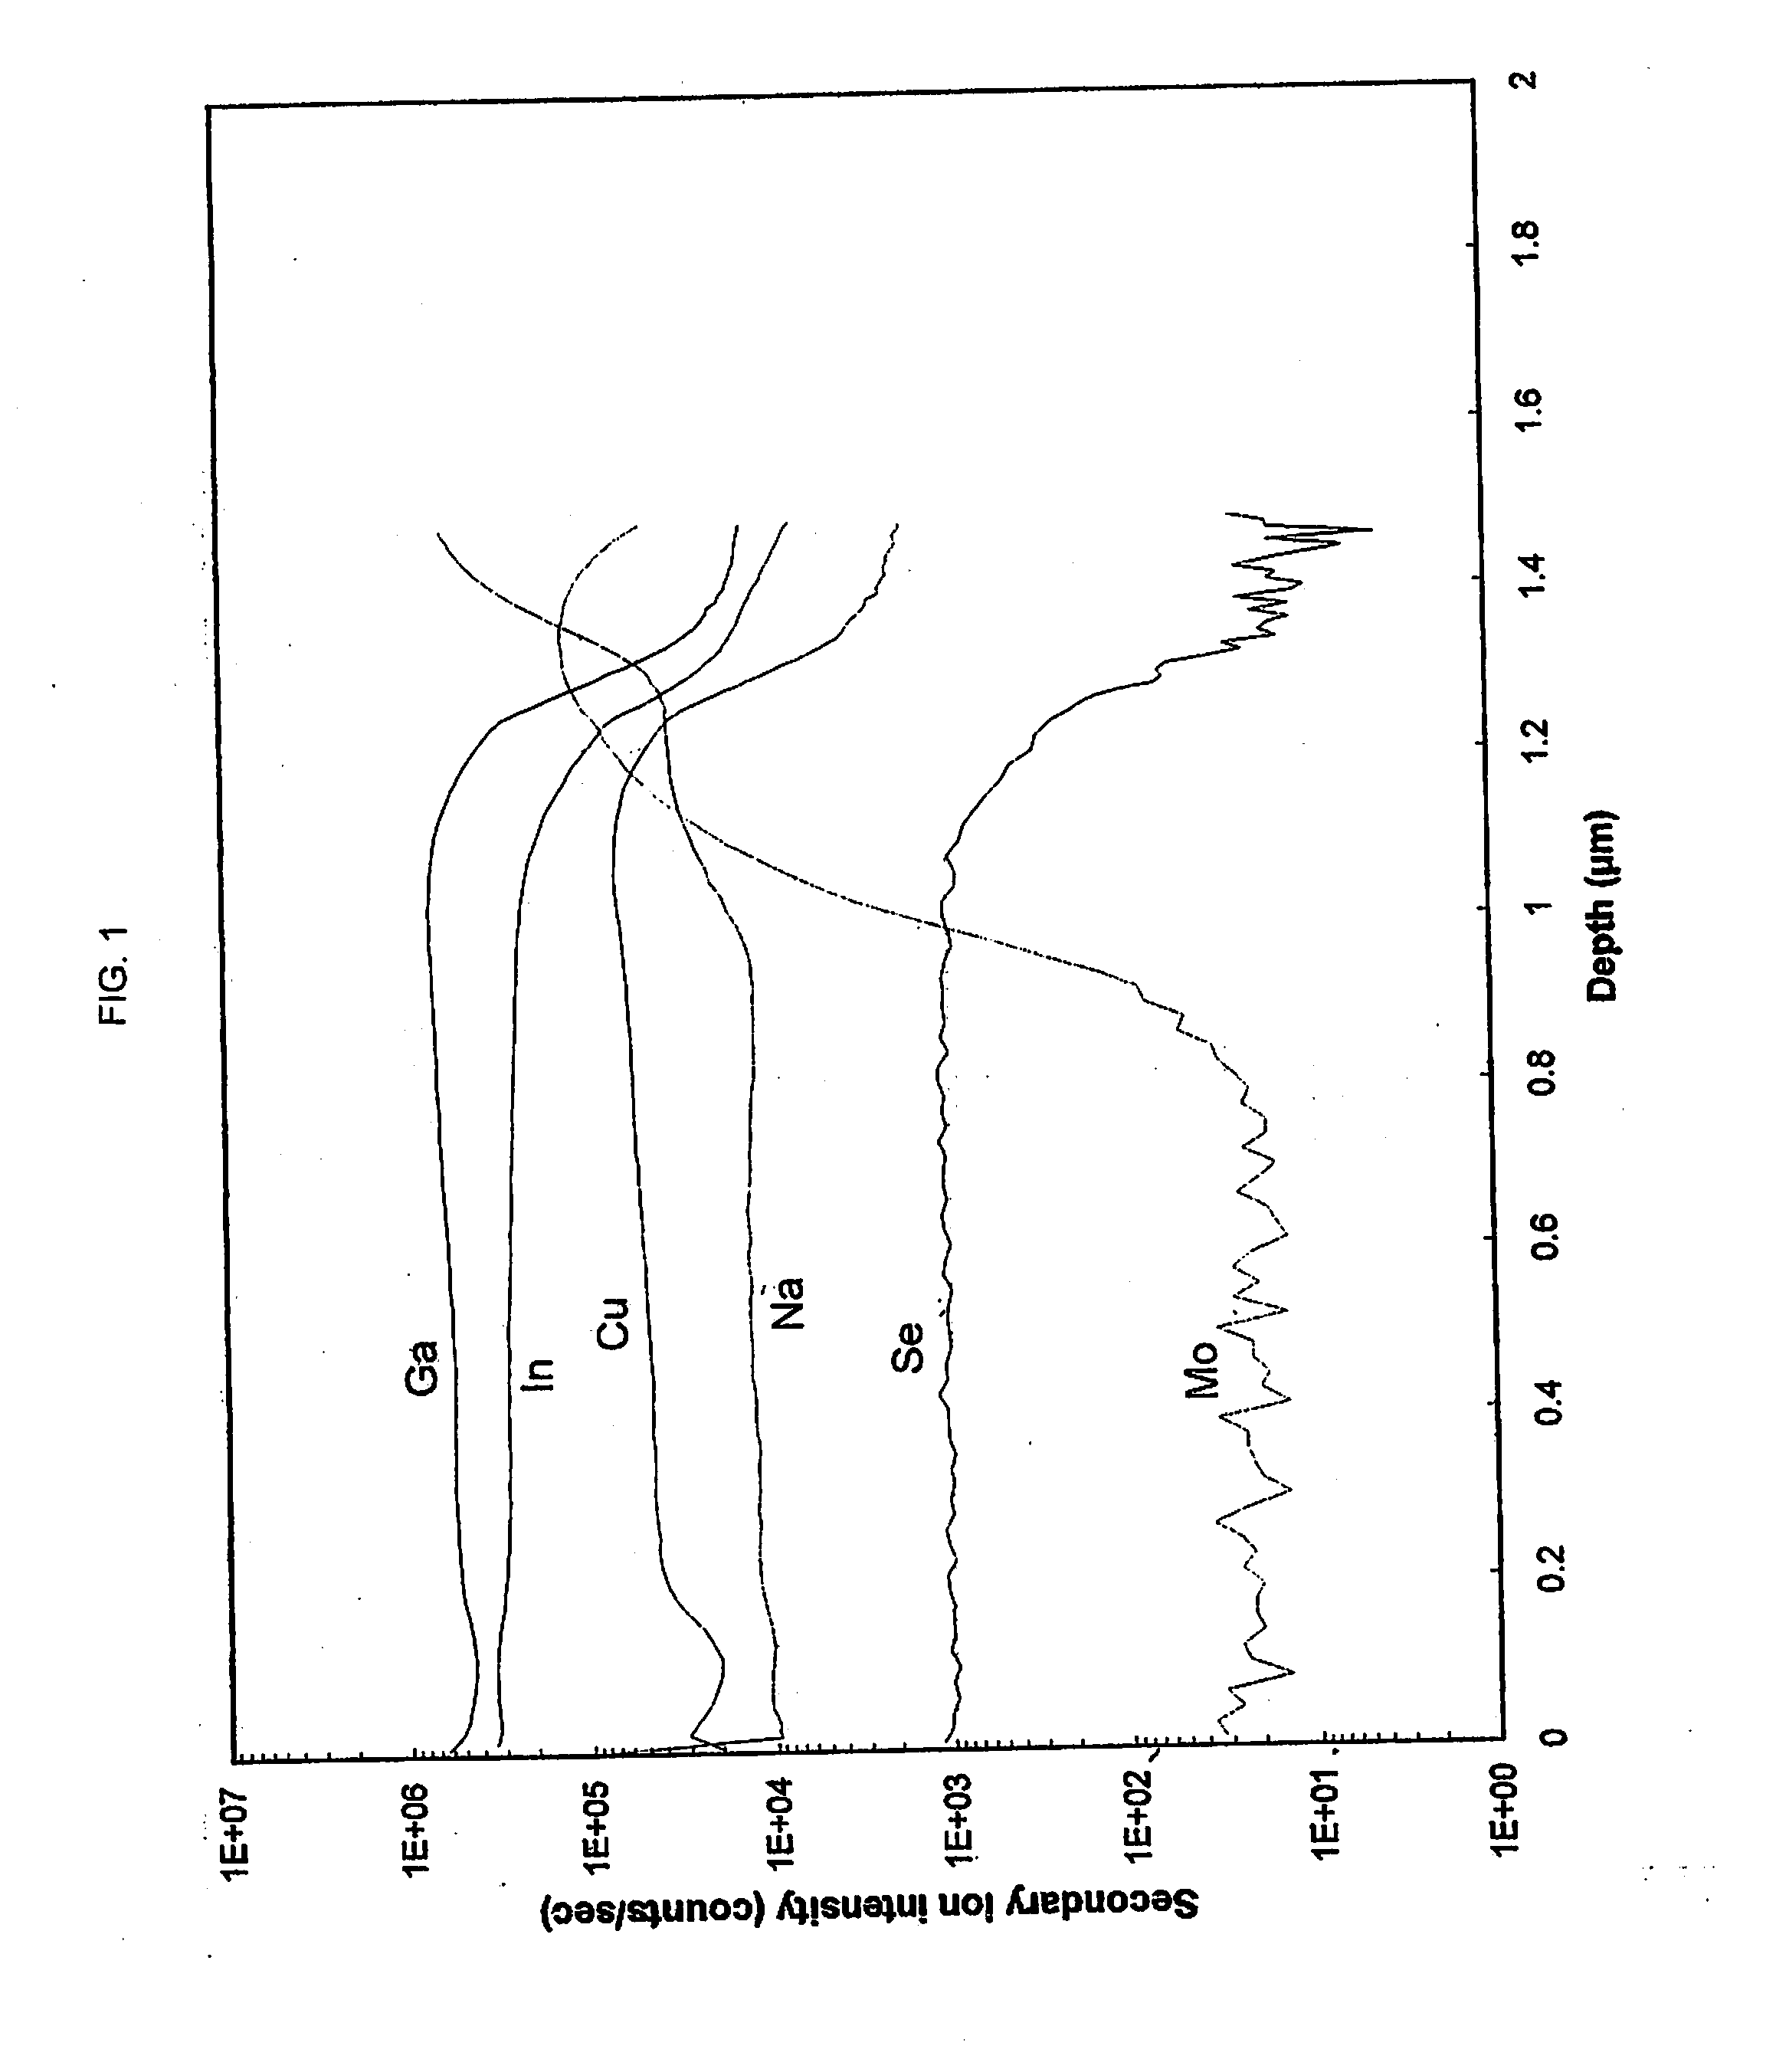 Solar photovoltaic devices having optional batteries